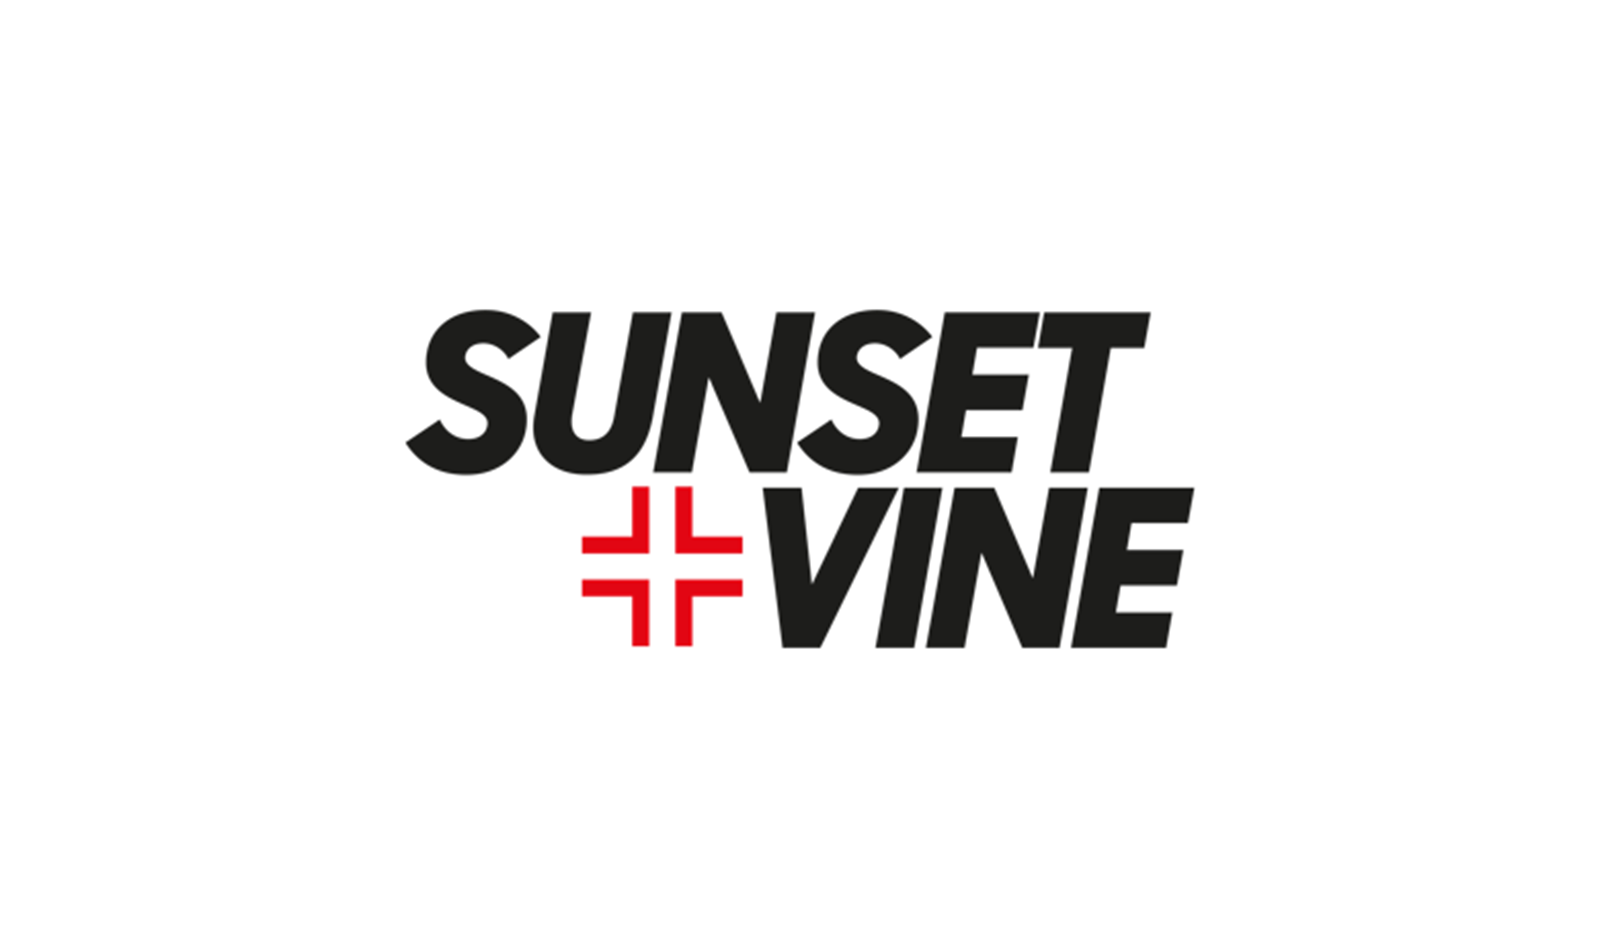 ICC TV and Sunset+Vine plan major Host Broadcast production of ICC Men's T20 World Cup in Australia